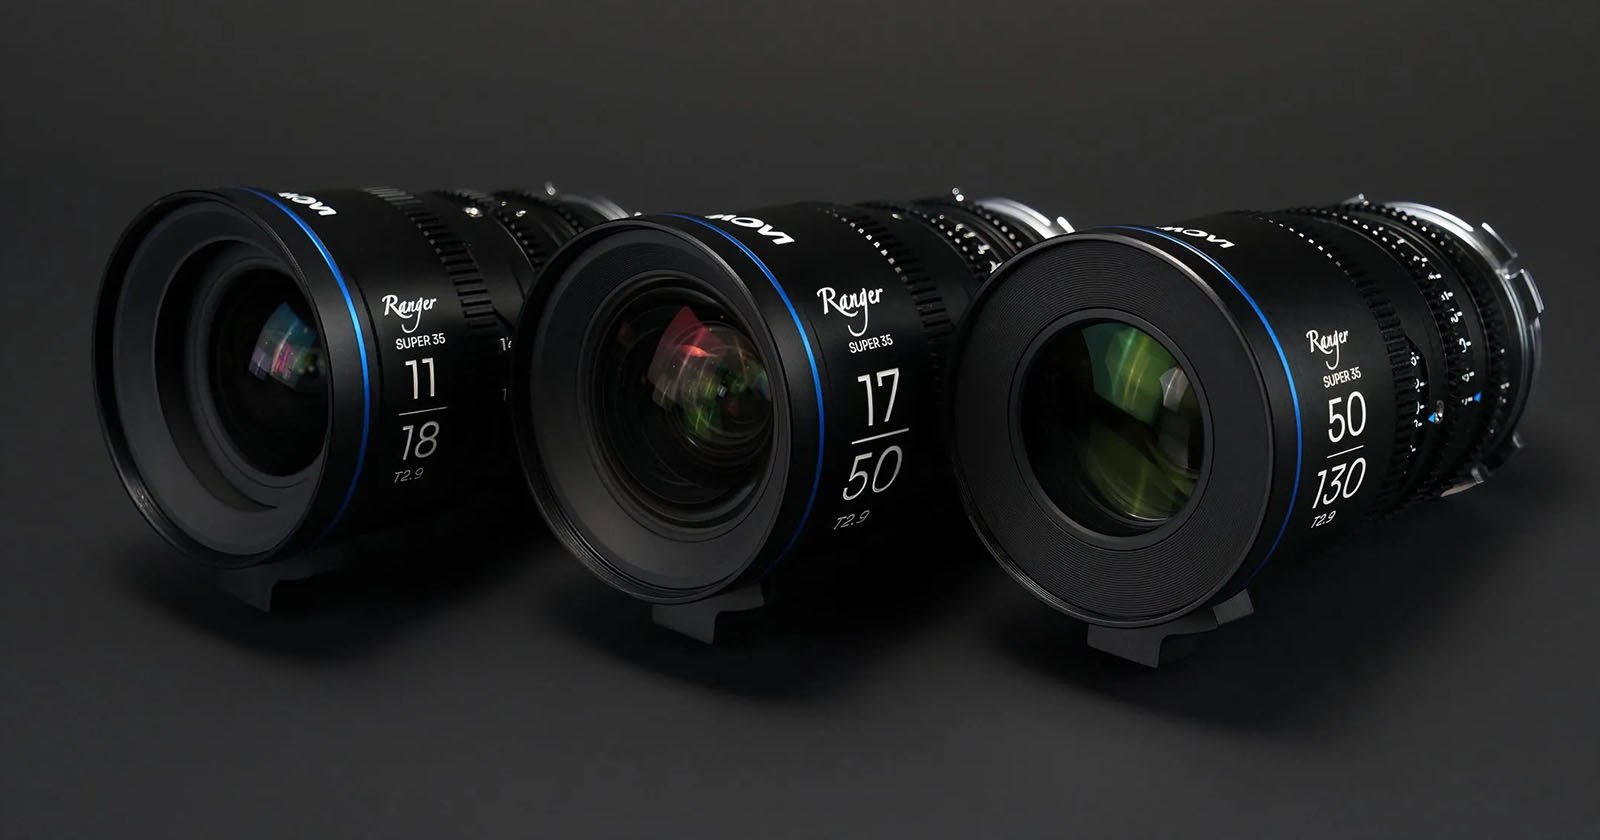  laowa ranger s35 lenses are compact 